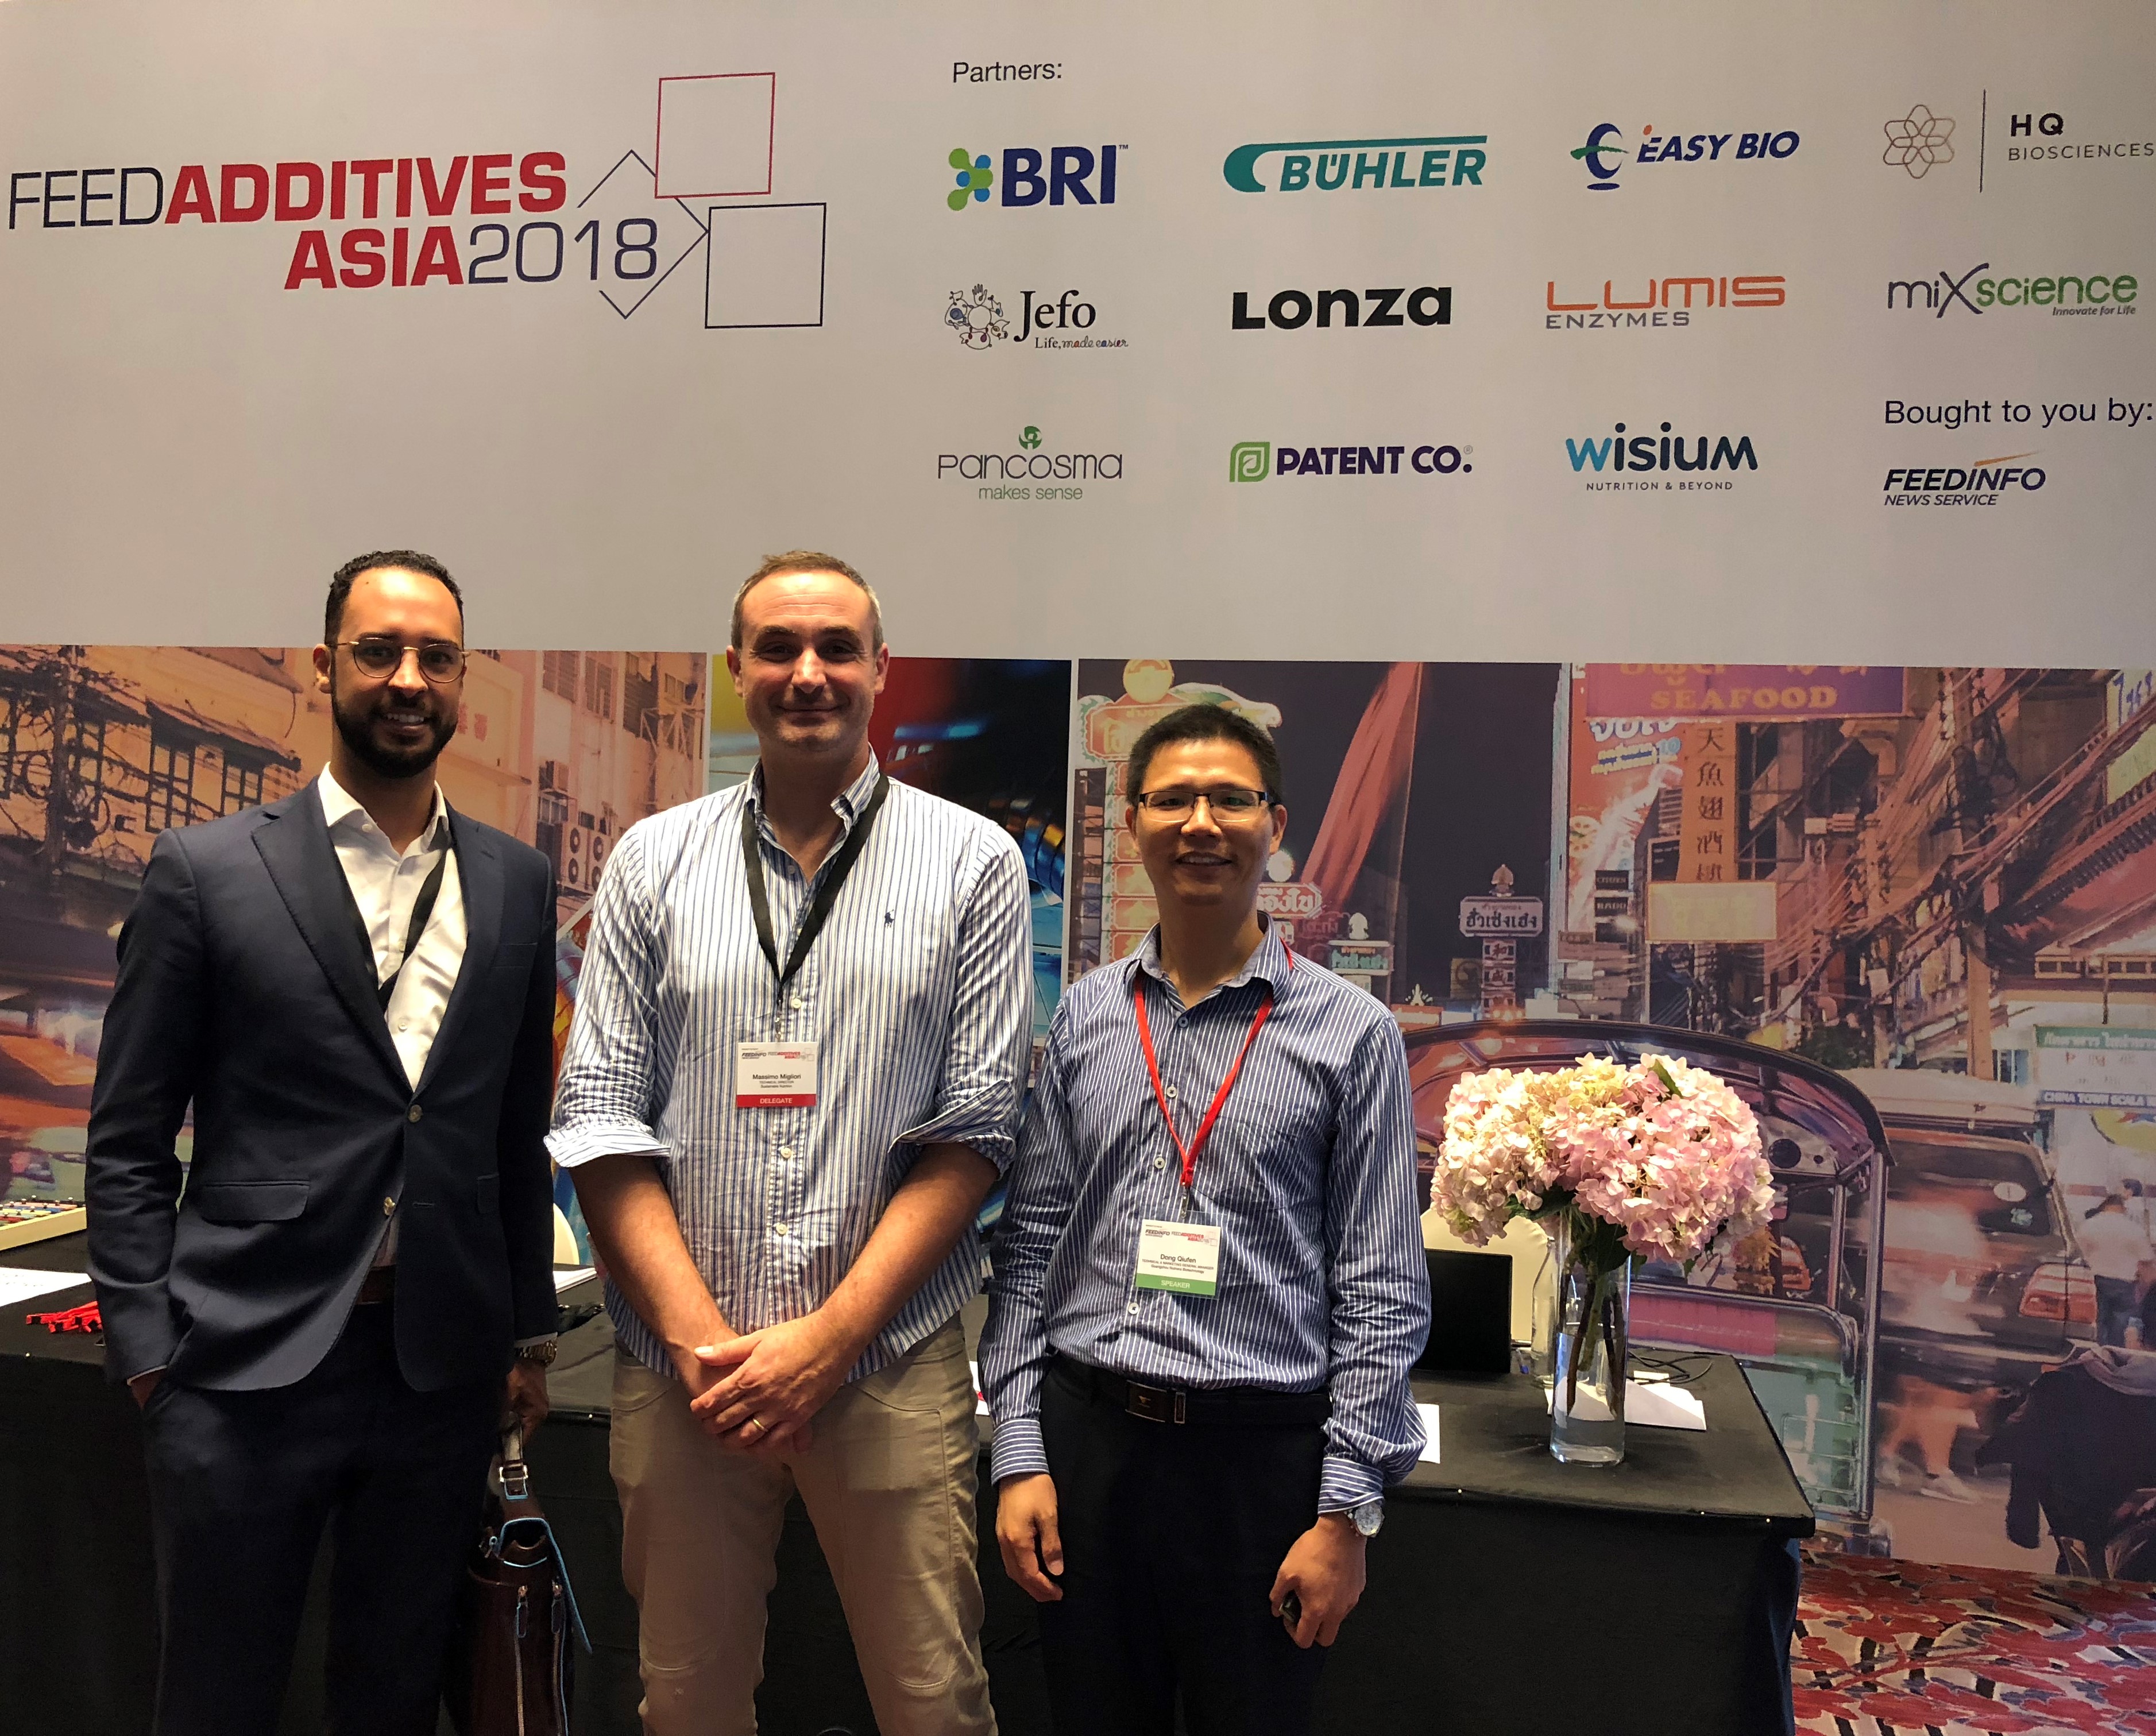 Nutriera’s technical expert was invited to make a presentation in the FEED ADDITIVES ASIA 2018